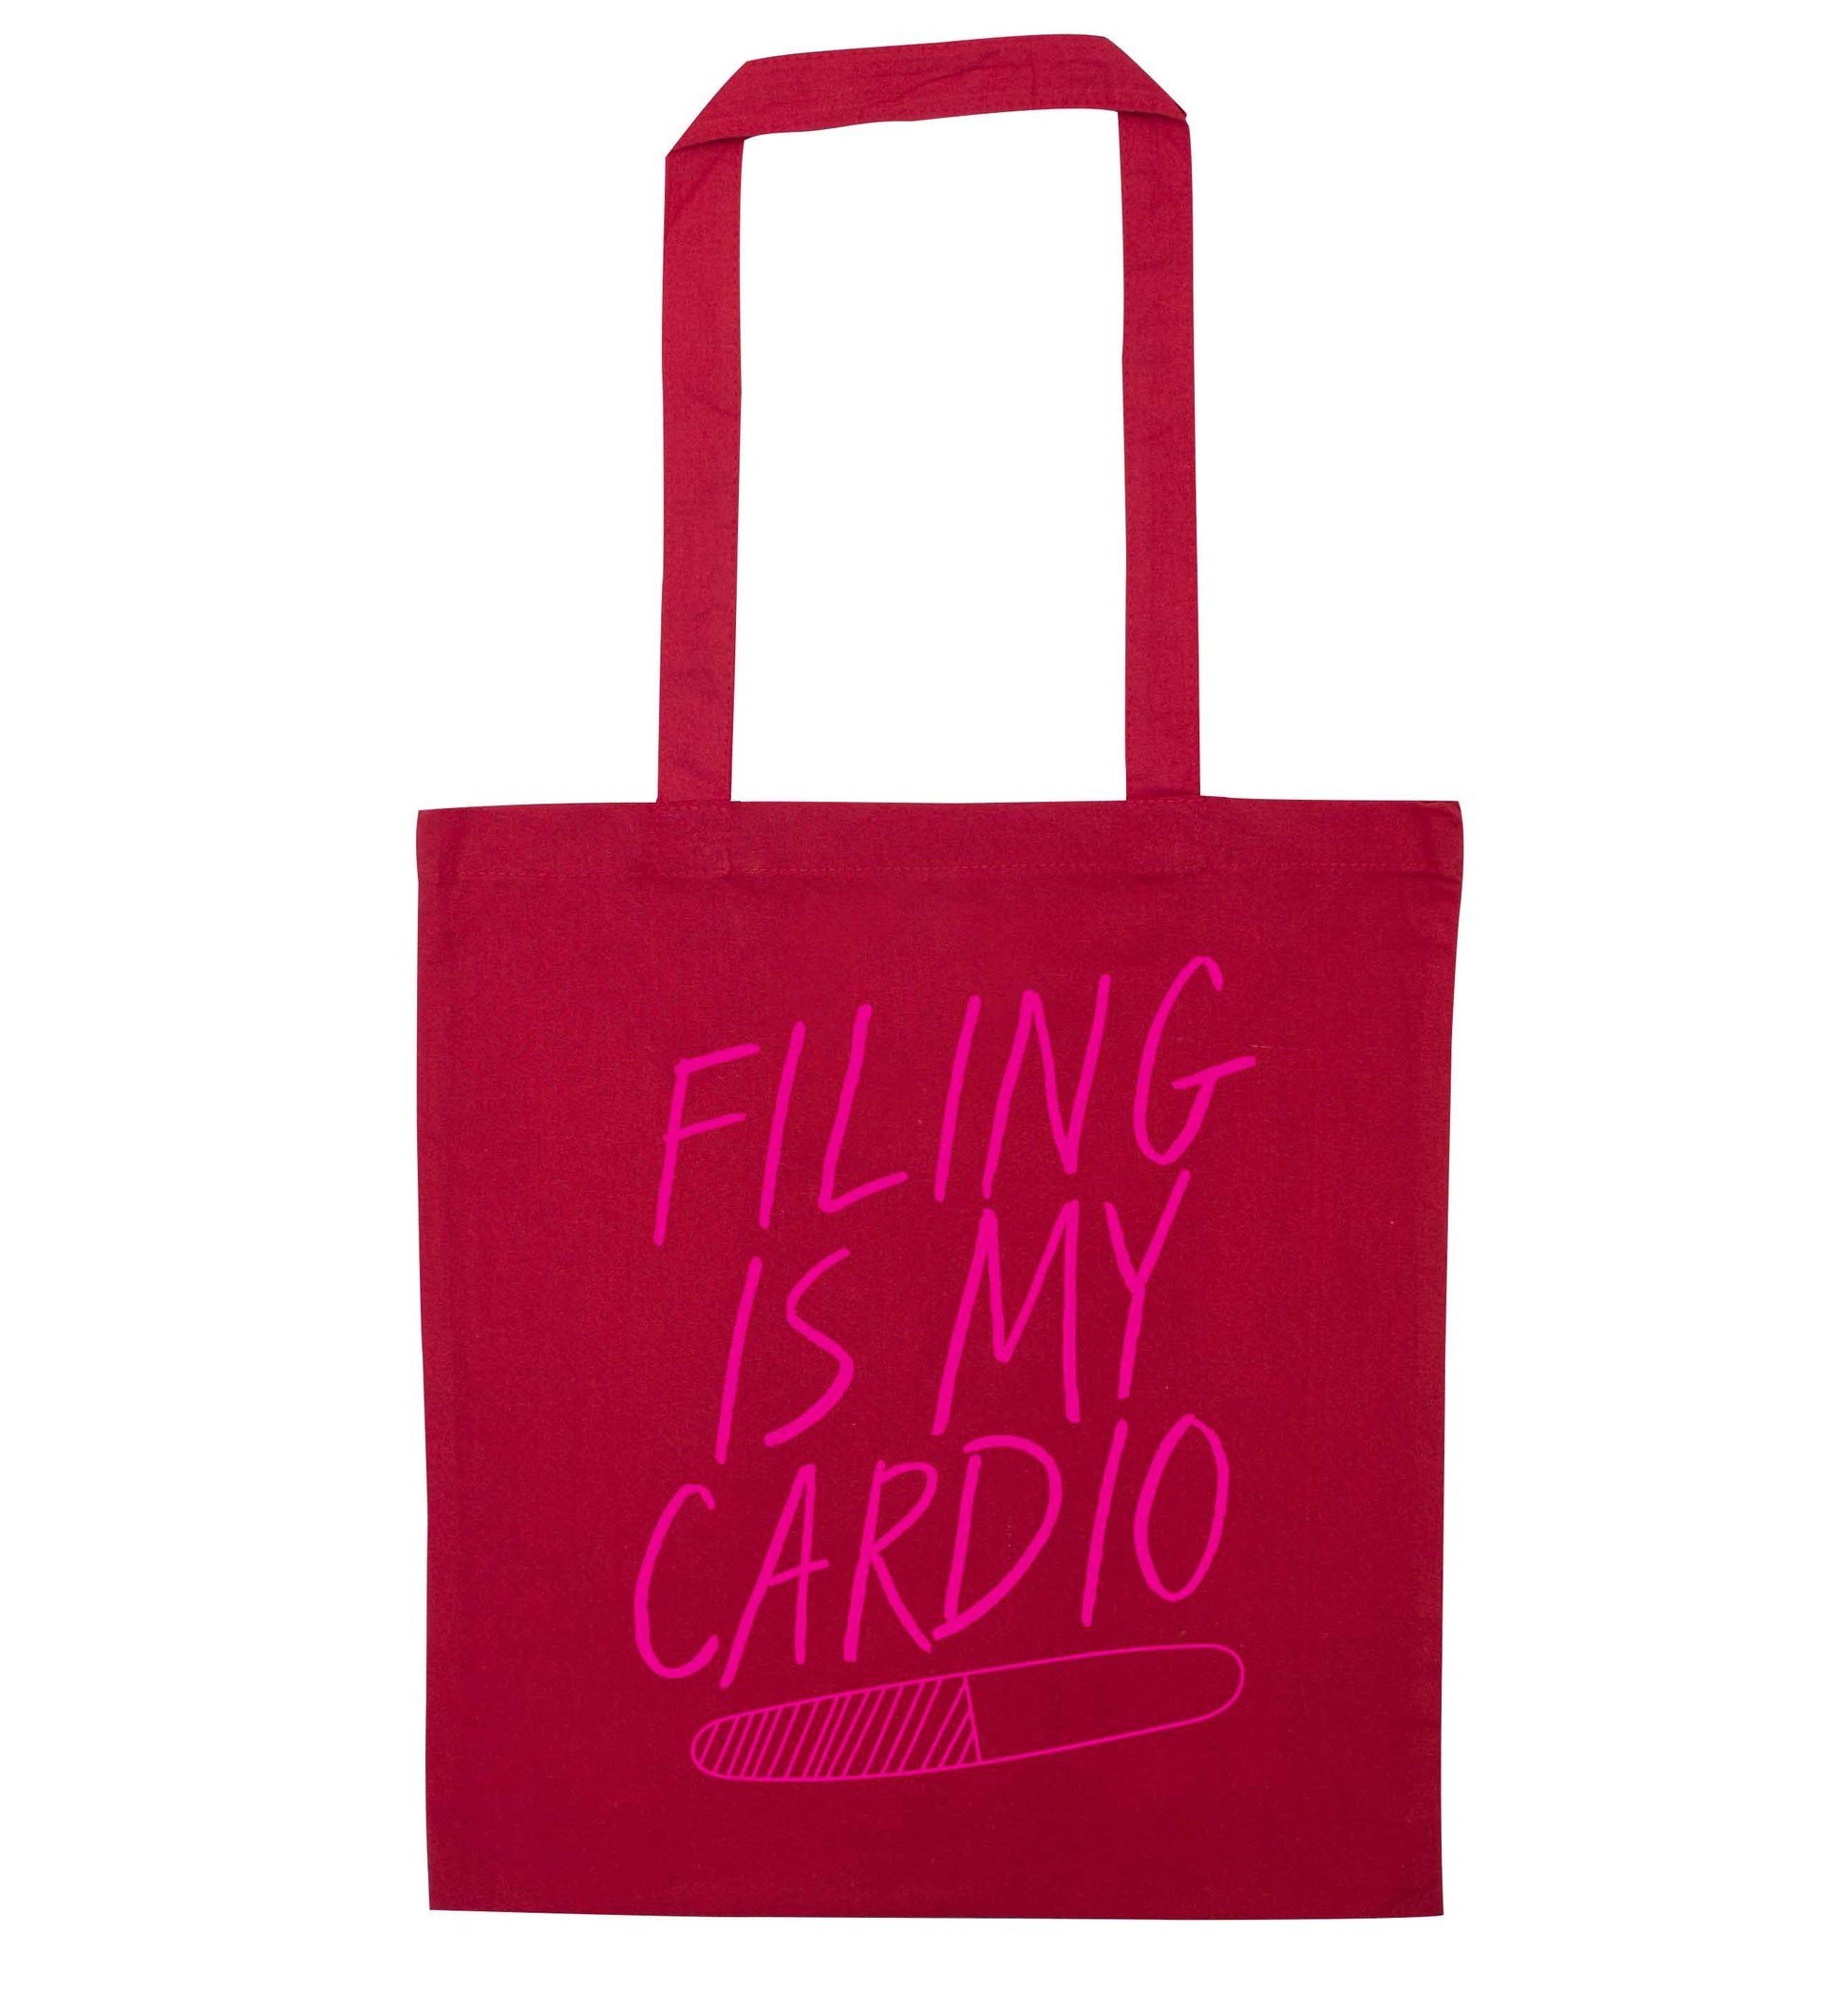 neon pink filing is my cardio red tote bag